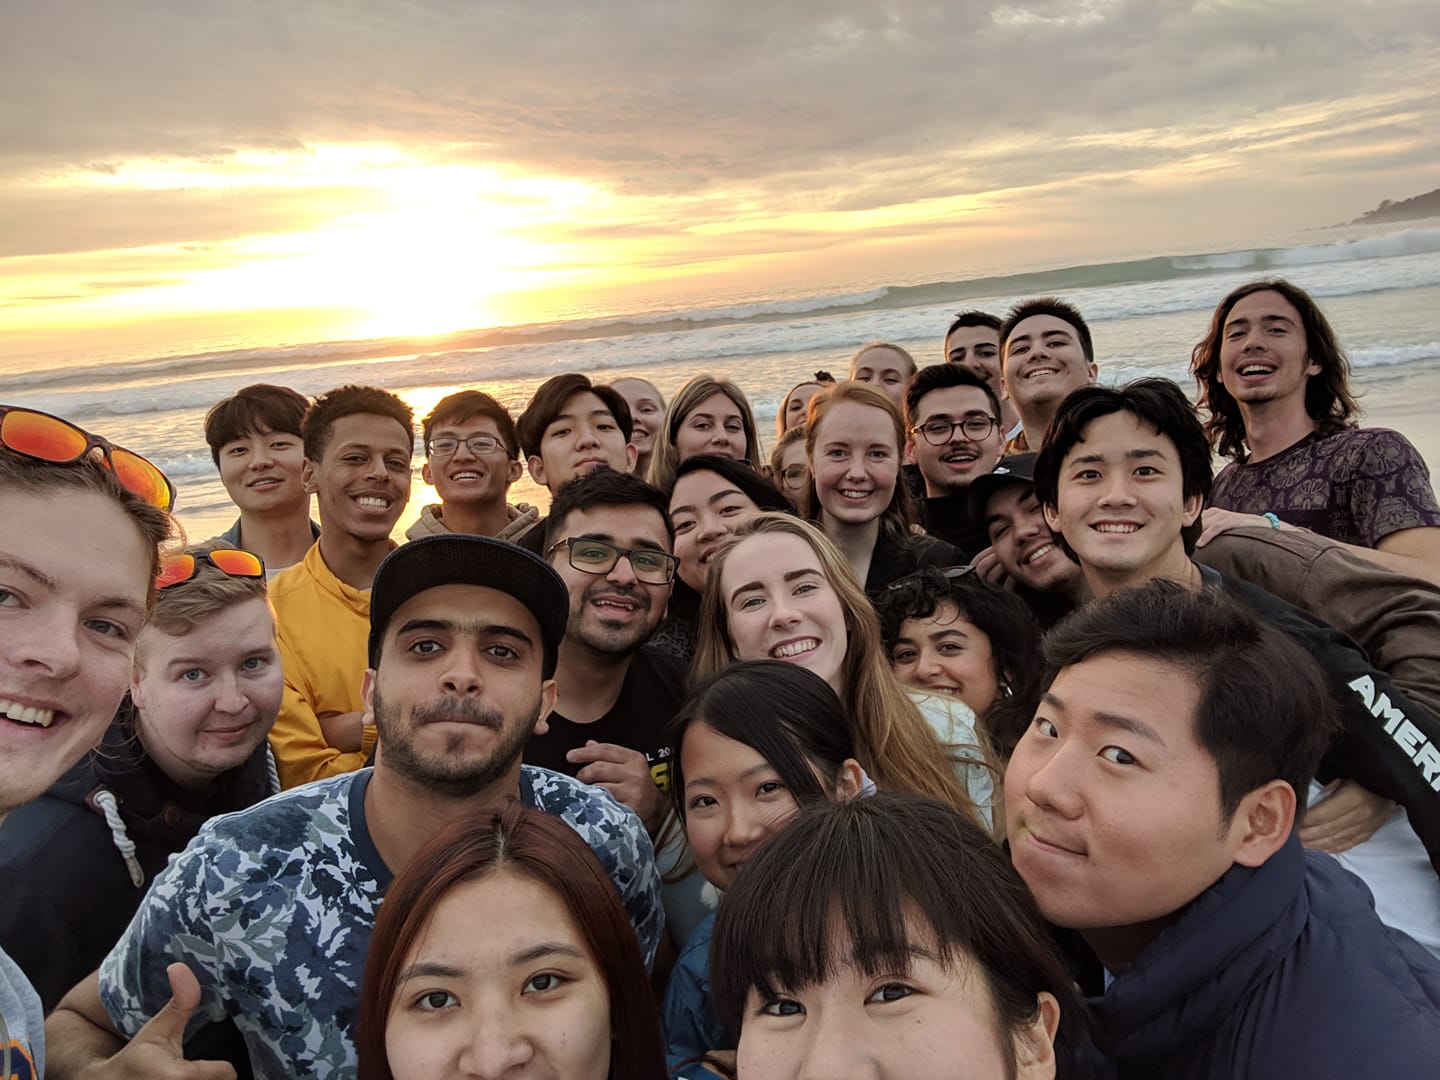 A group image of residents from Spring 2019 at Carmel Beach, Carmel CA